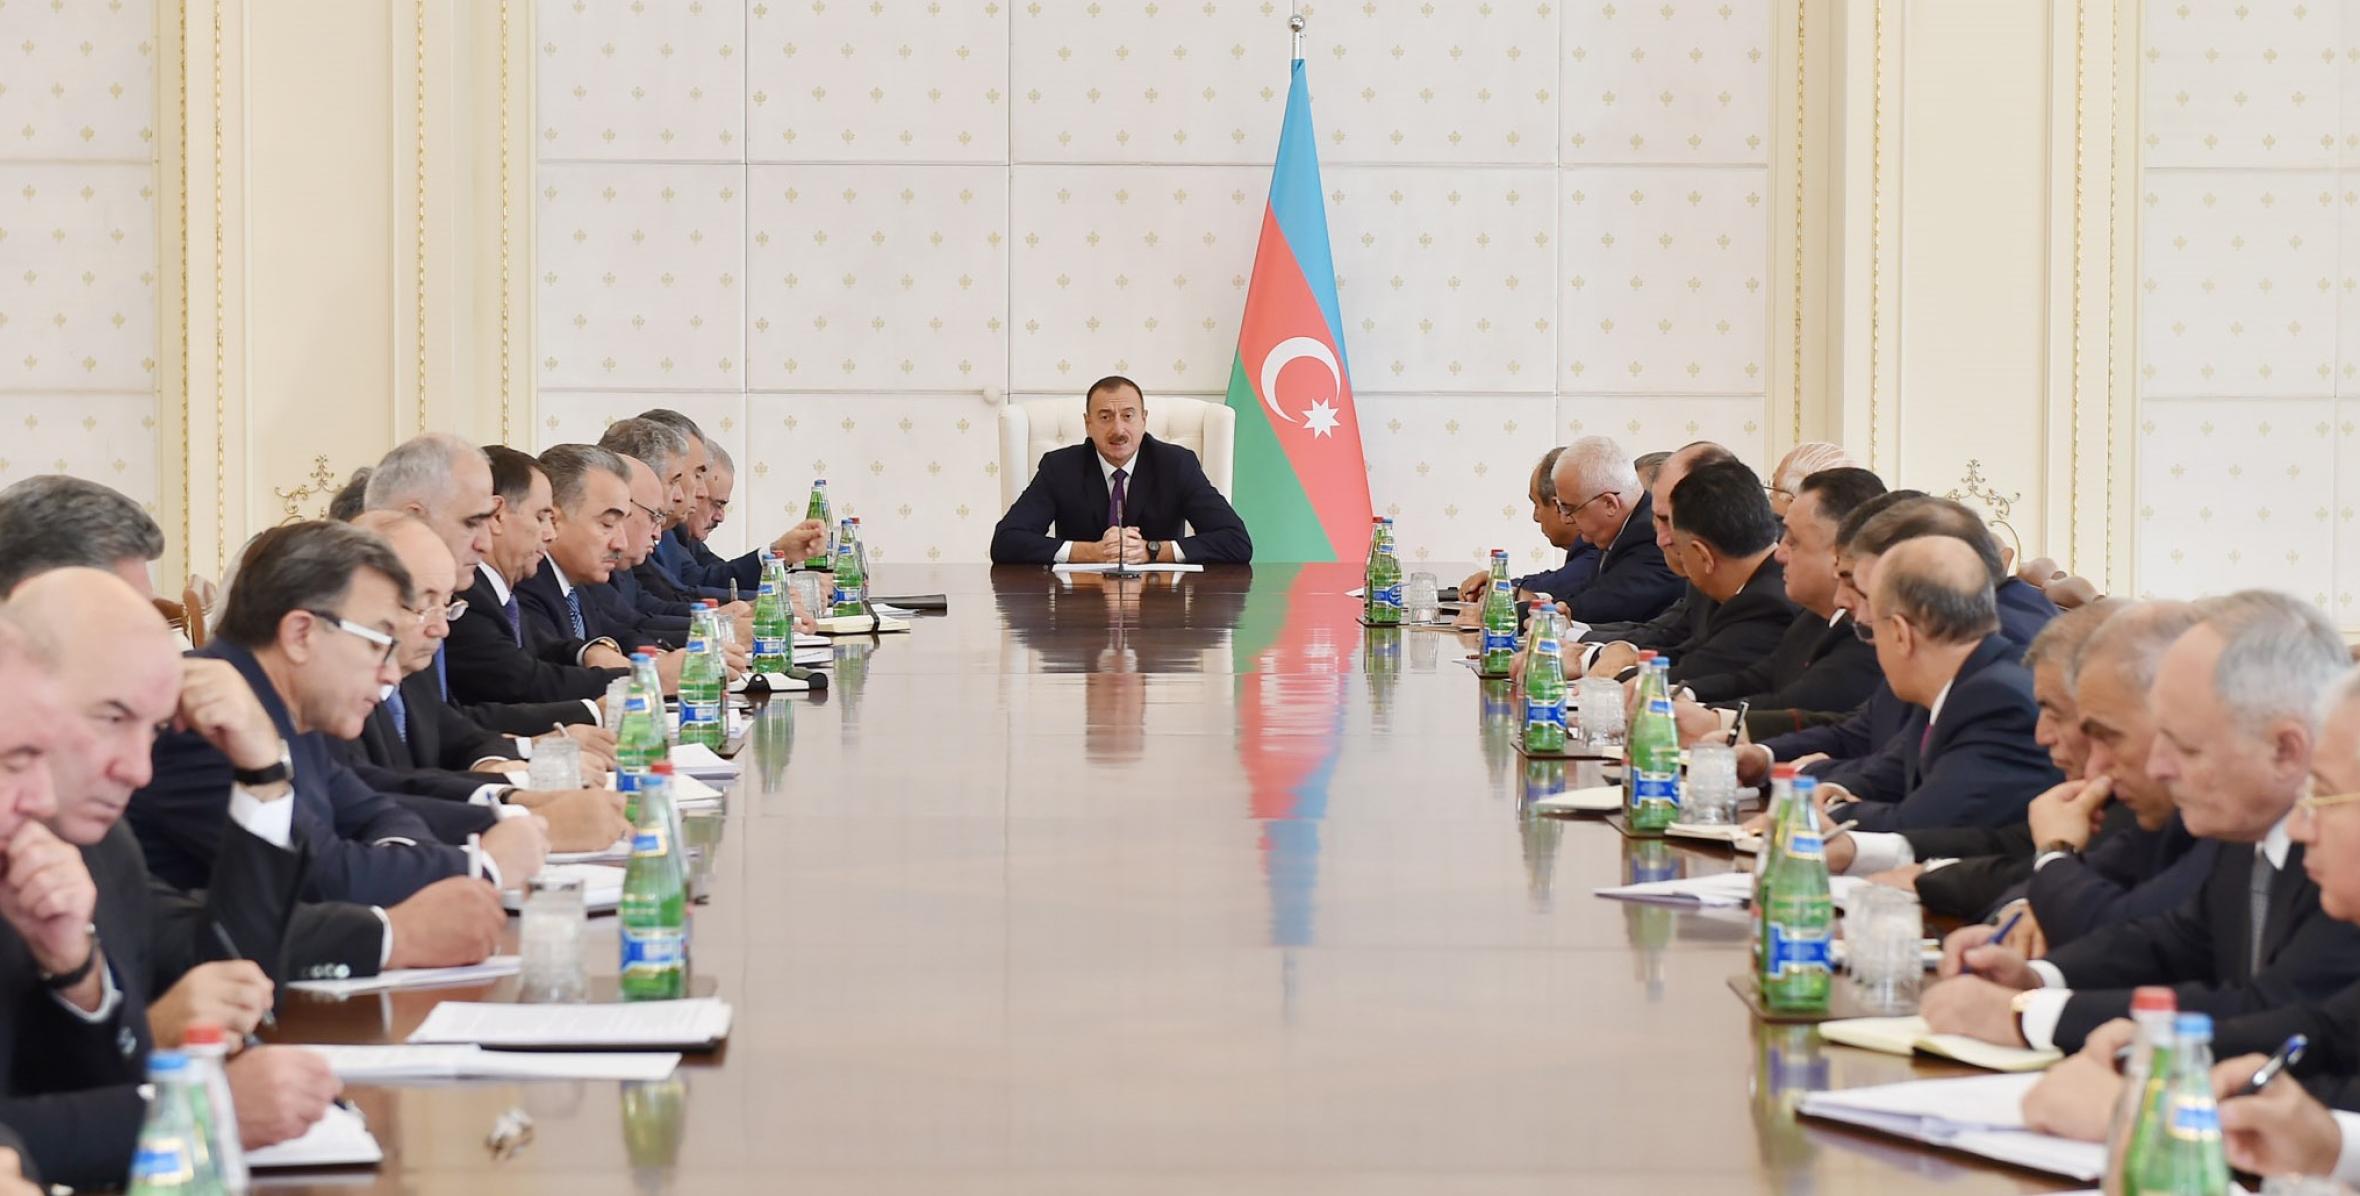 Ilham Aliyev chaired the meeting of the Cabinet of Ministers dedicated to the results of socioeconomic development in nine months of 2014 and objectives for the future